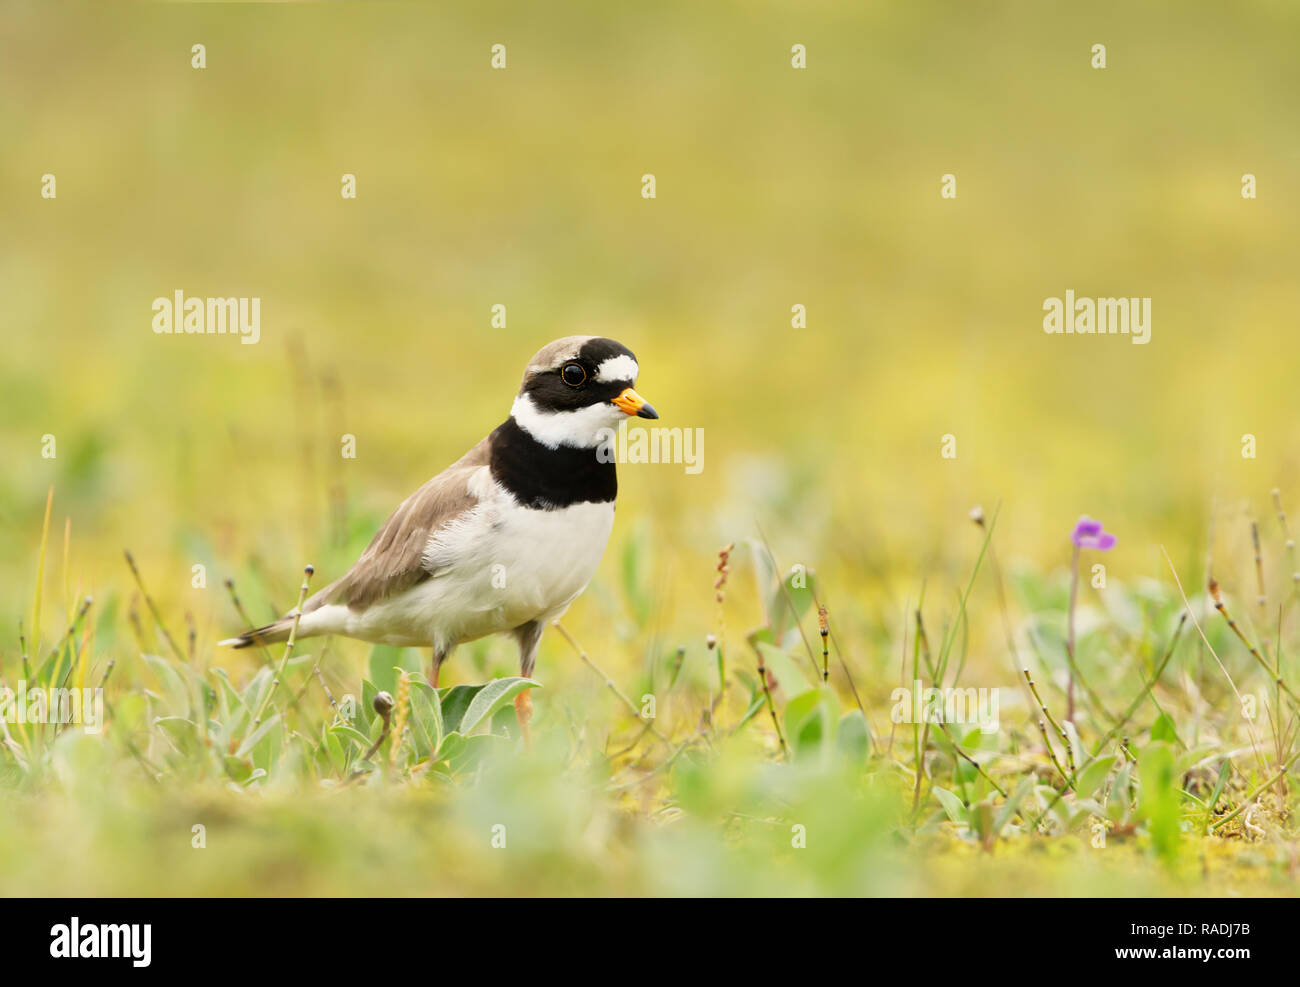 Common ringed plover (Charadrius hiaticula) standing in the grass, summer in Iceland. Stock Photo